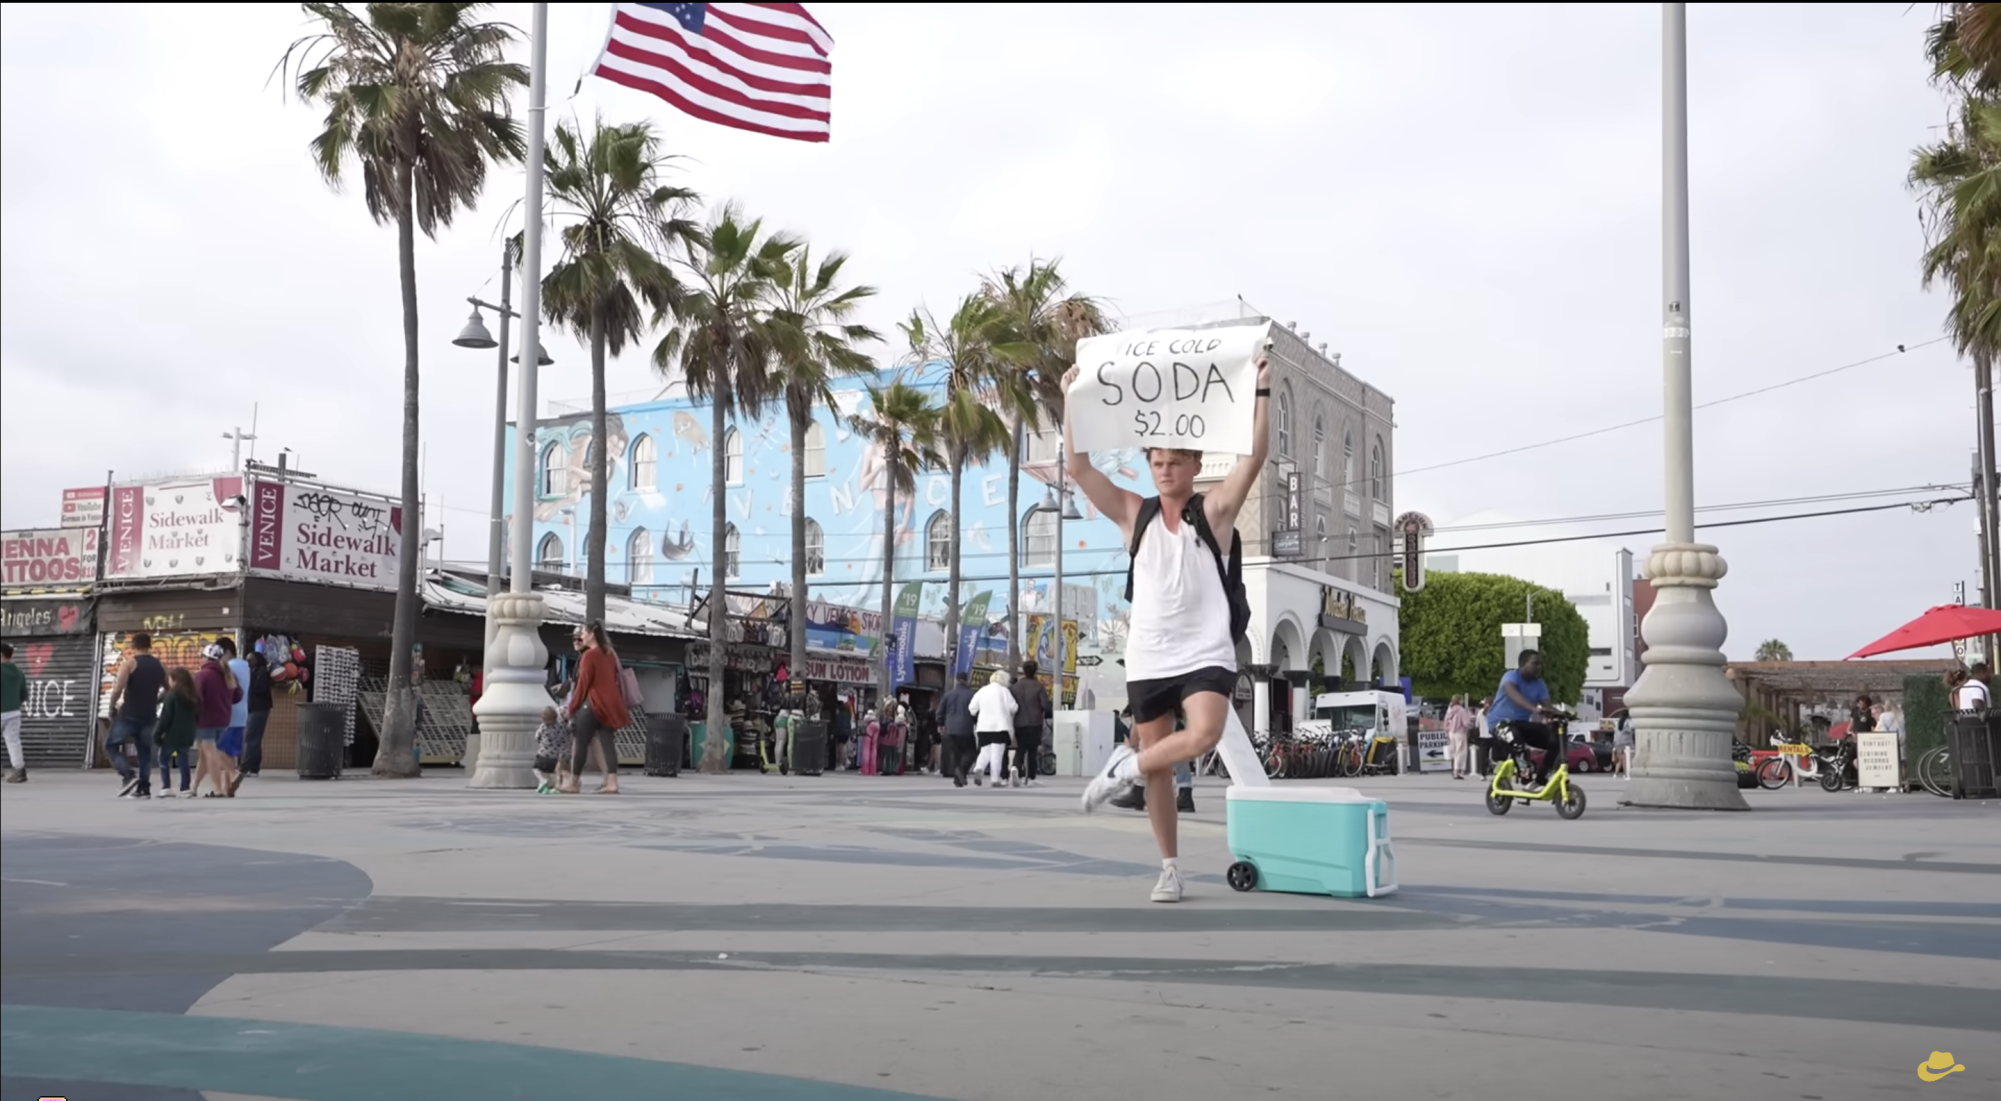 Day 1- Venice Beach, California: 
Trahan sells sodas, using signs to attract customers. 
